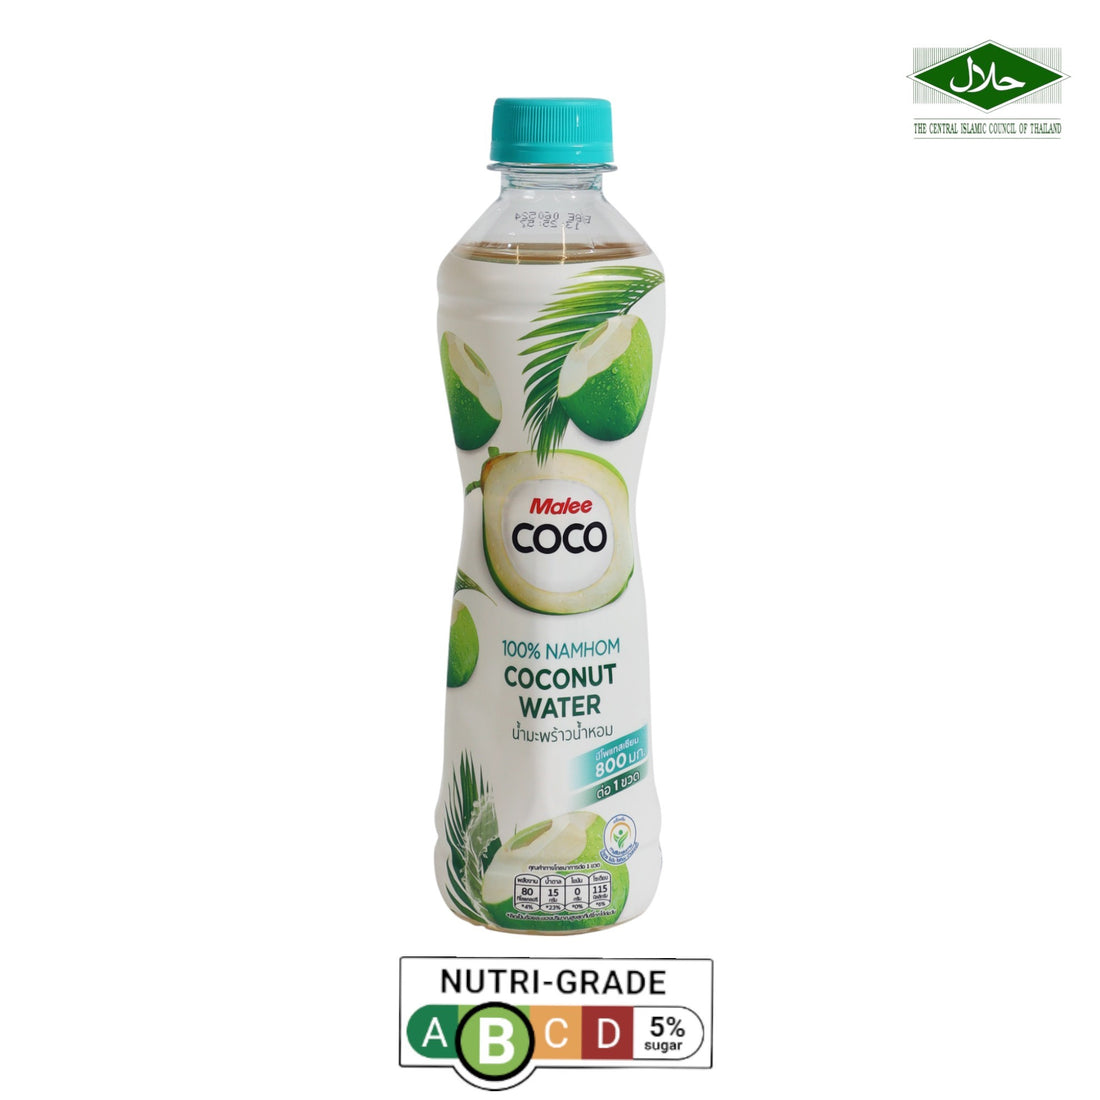 Malee Coco 100% Namhom Coconut Water 350ml (2 For) (Exp Date:03/03/2025)